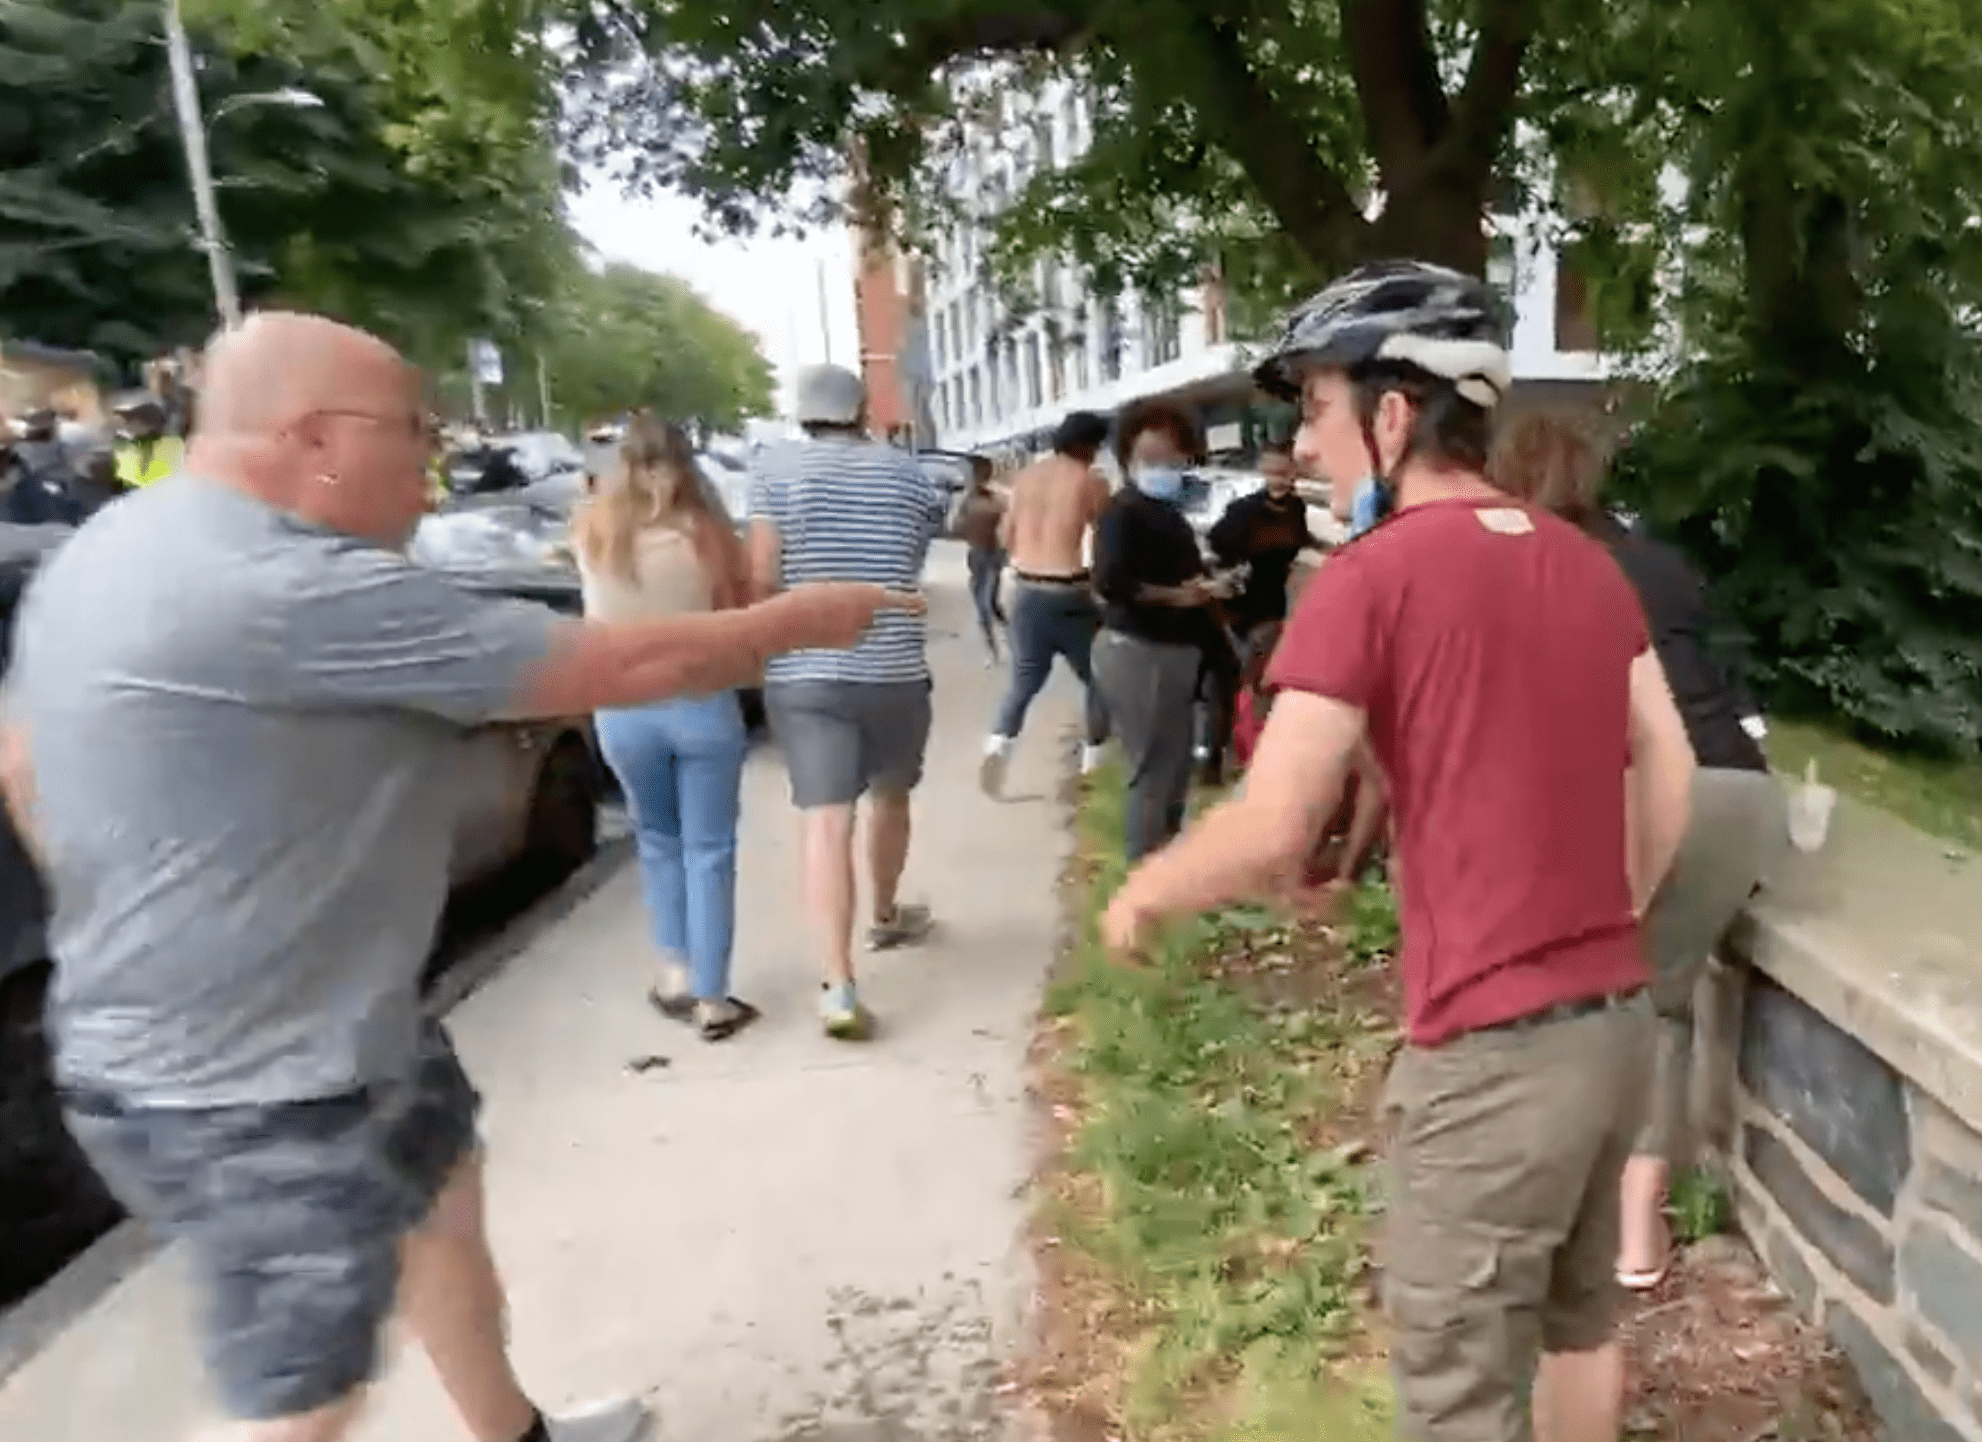 Protestors react to police who have been violent with them | Photo: Twitter/zwoodford